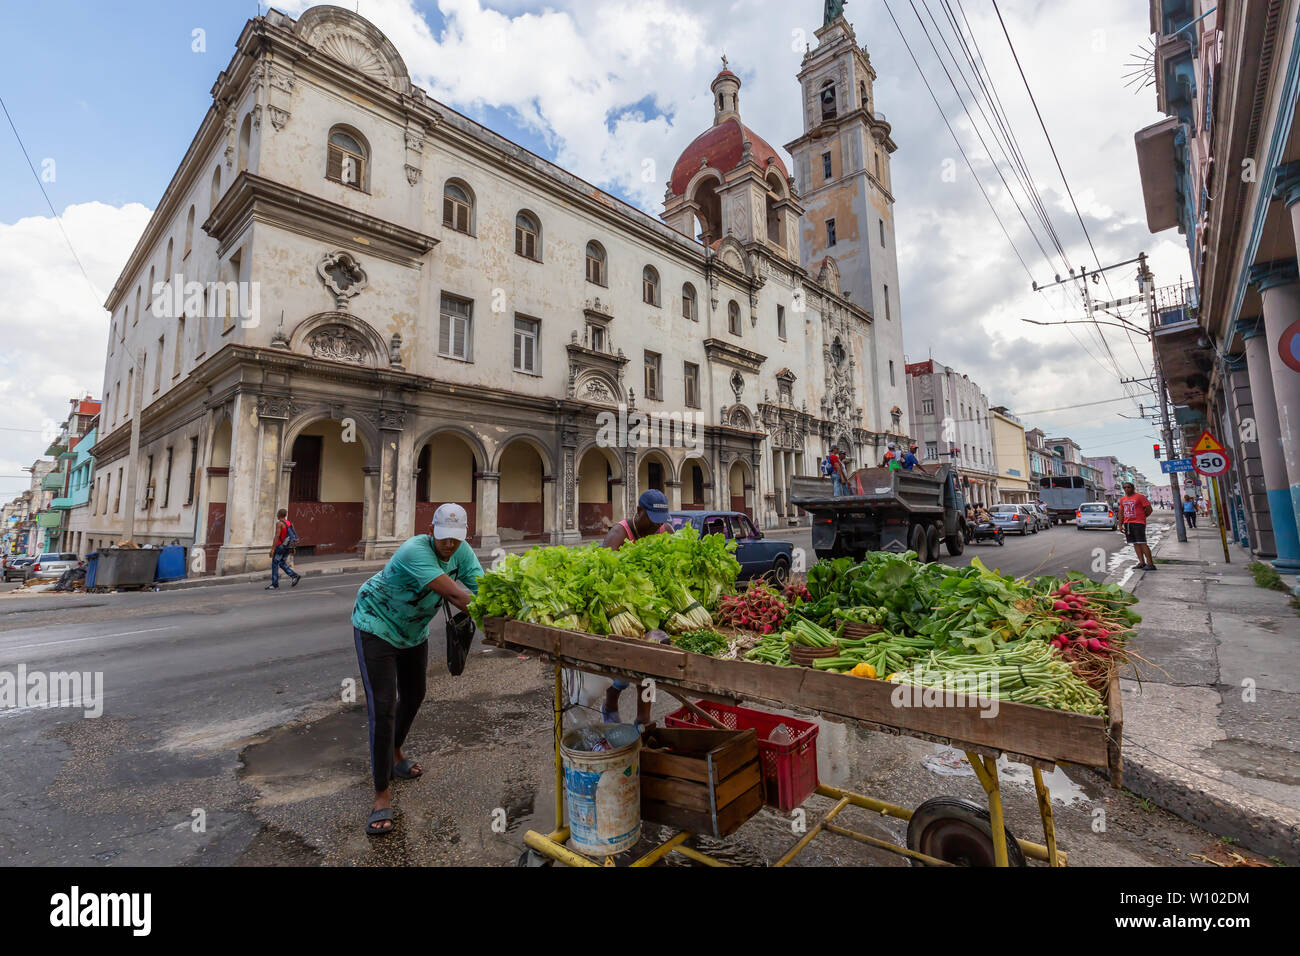 Havana, Cuba - May 14, 2019: Vendor selling Green Vegetables in the streets of Old Havana City during a cloudy day. Stock Photo